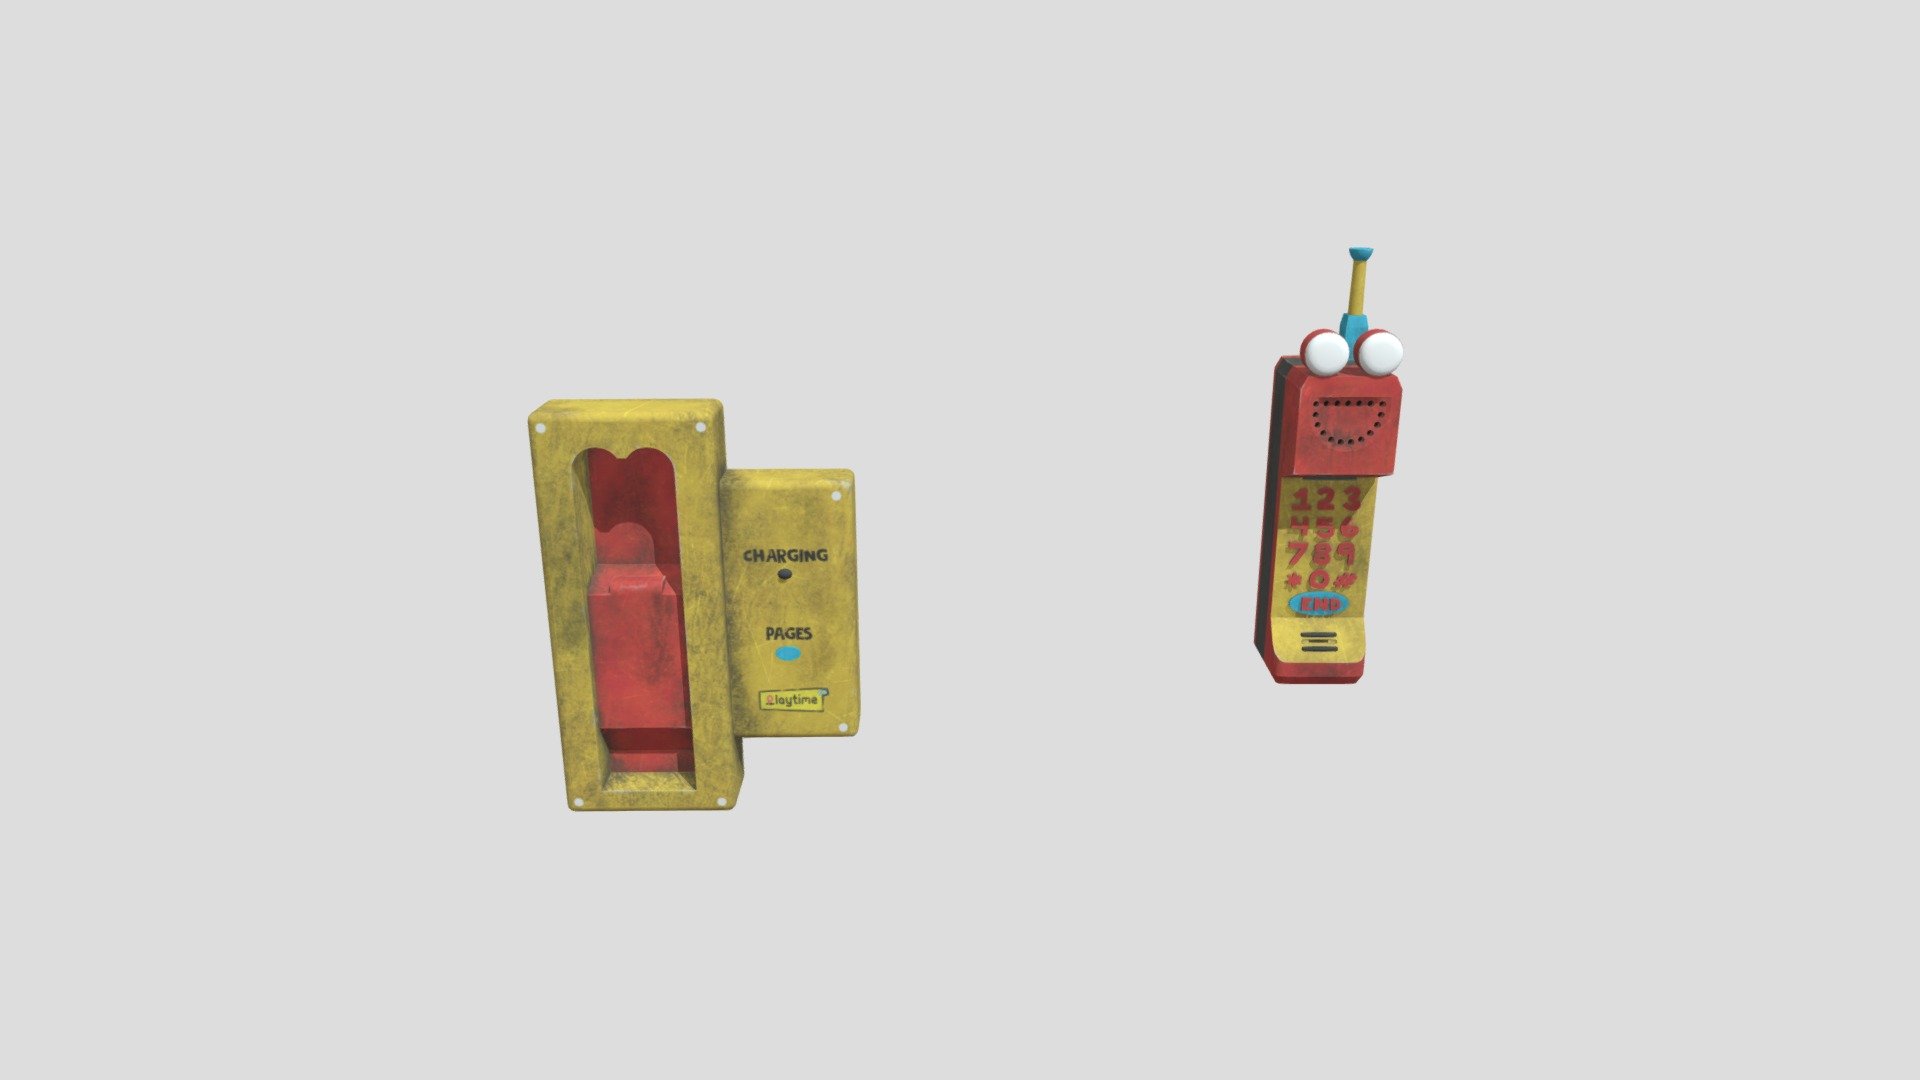 who is Ollie

Do not reupload - (Ollie) The Phone - 3D model by Jelly master (@Misty.) 3d model